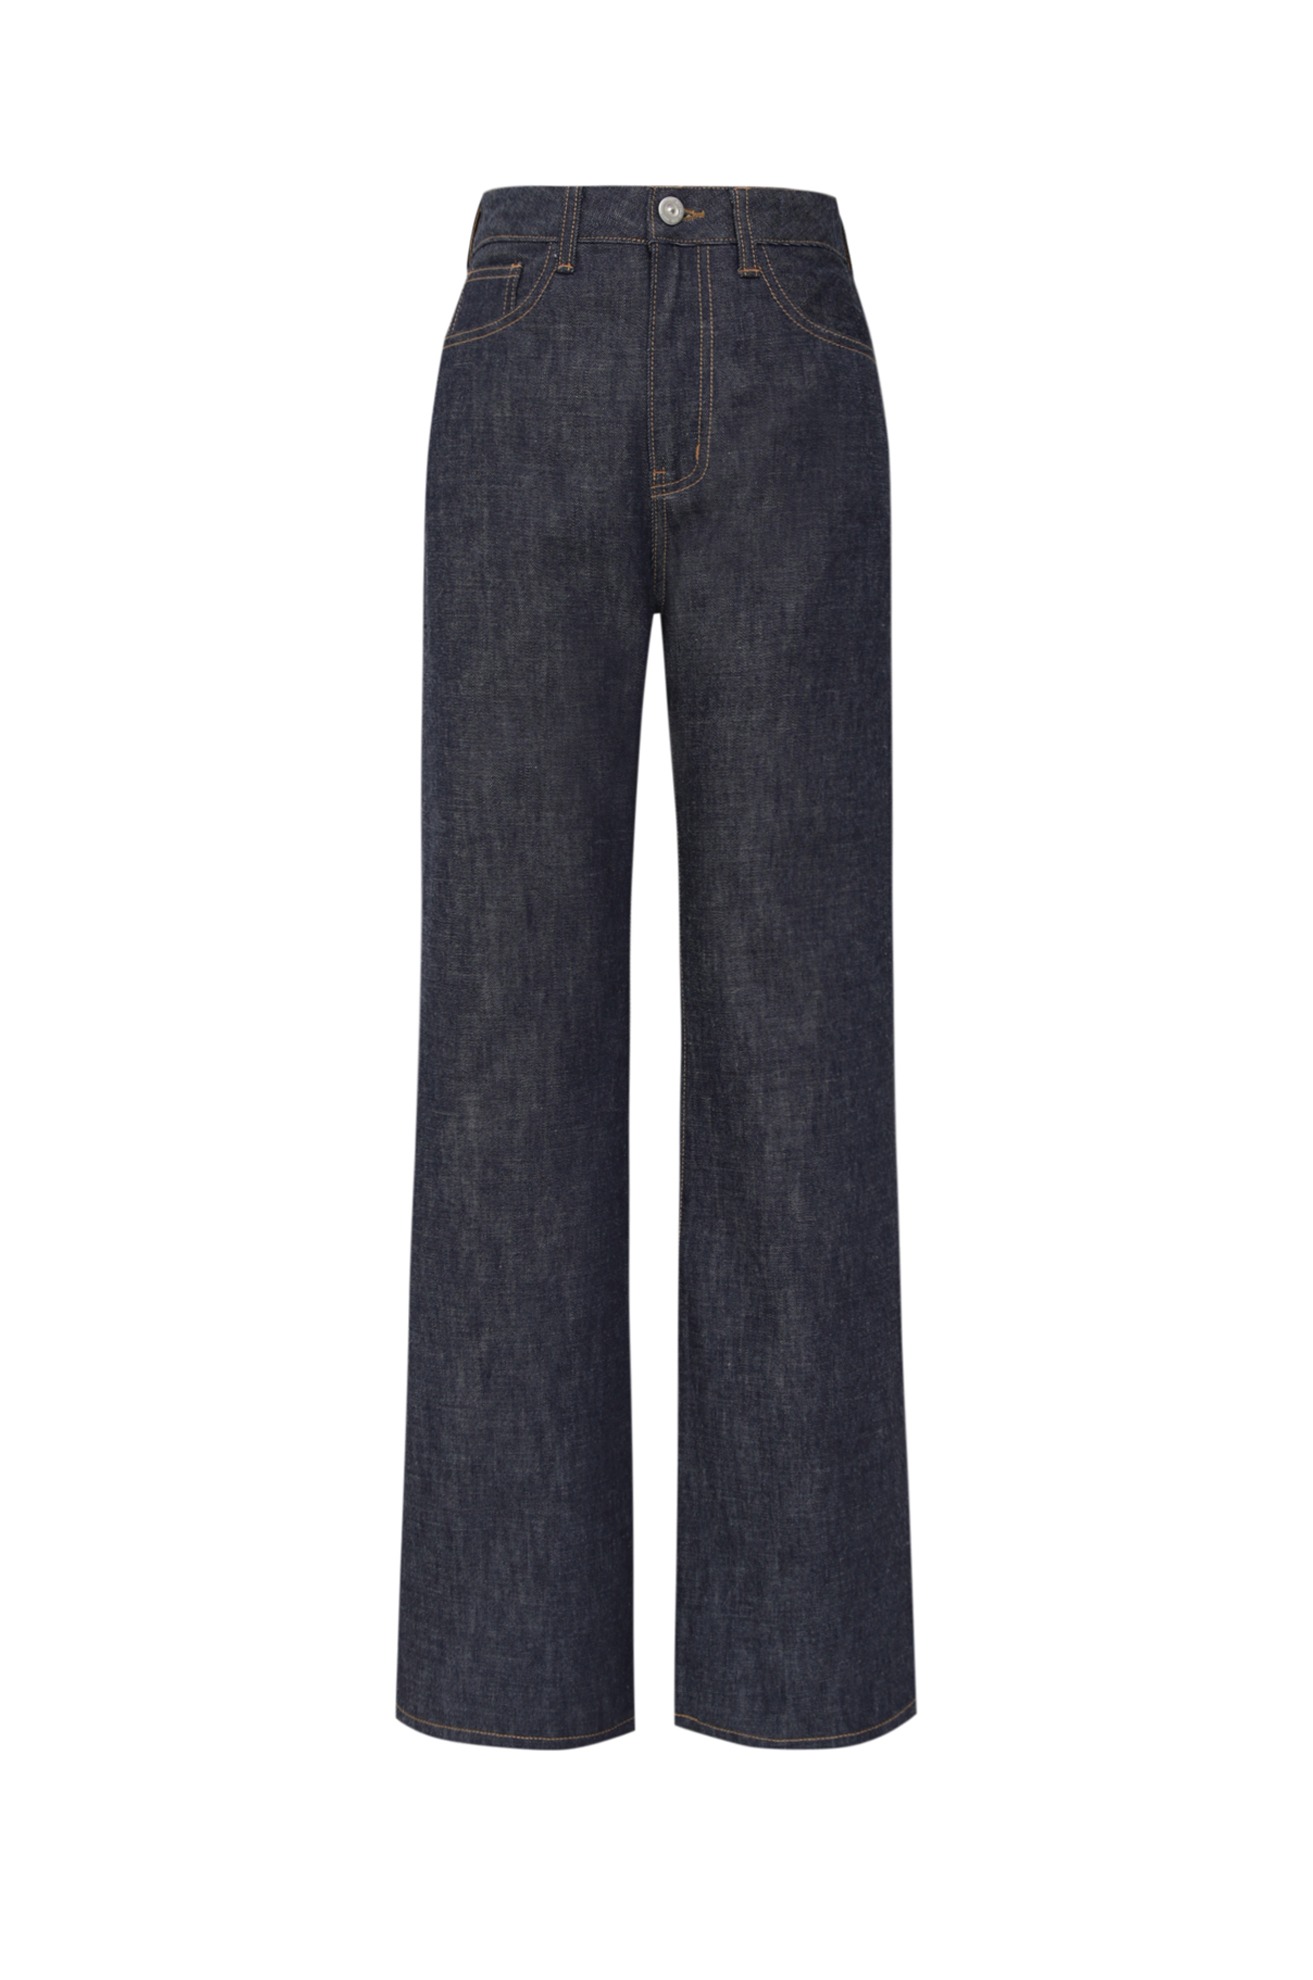 Japanese 13.5oz. Flared Cut Jeans ATELIER EDITION 